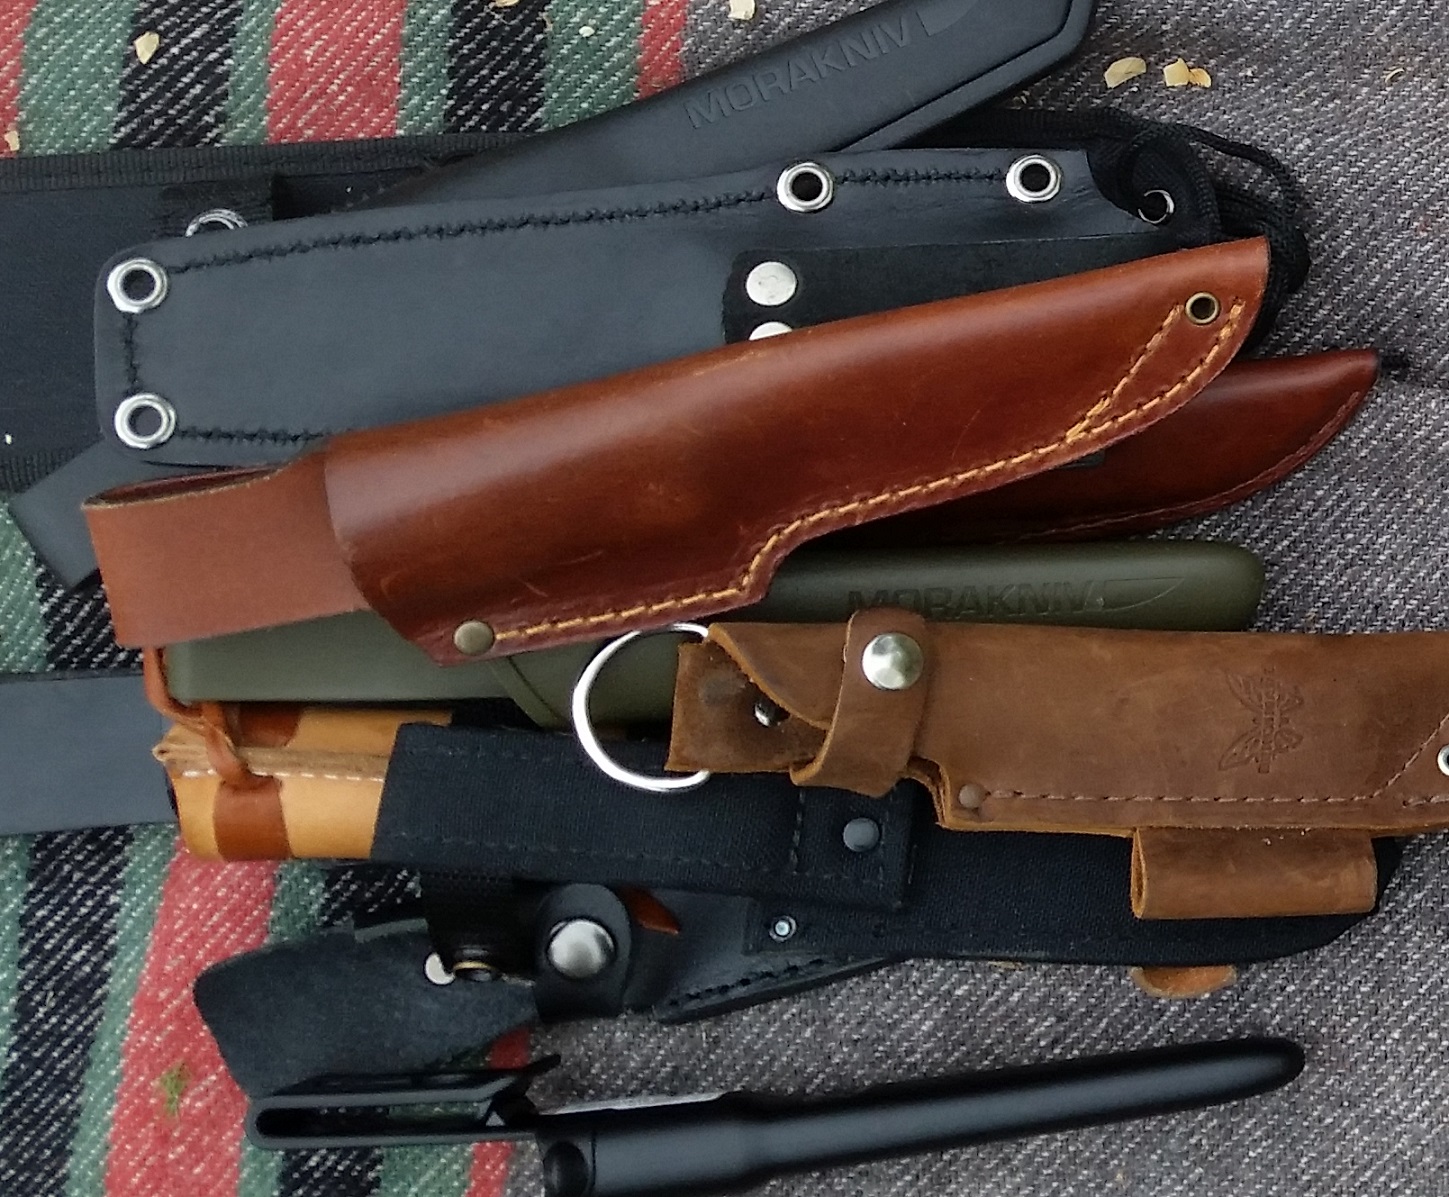 Knives - Tools & Art: How to Carry a Knife